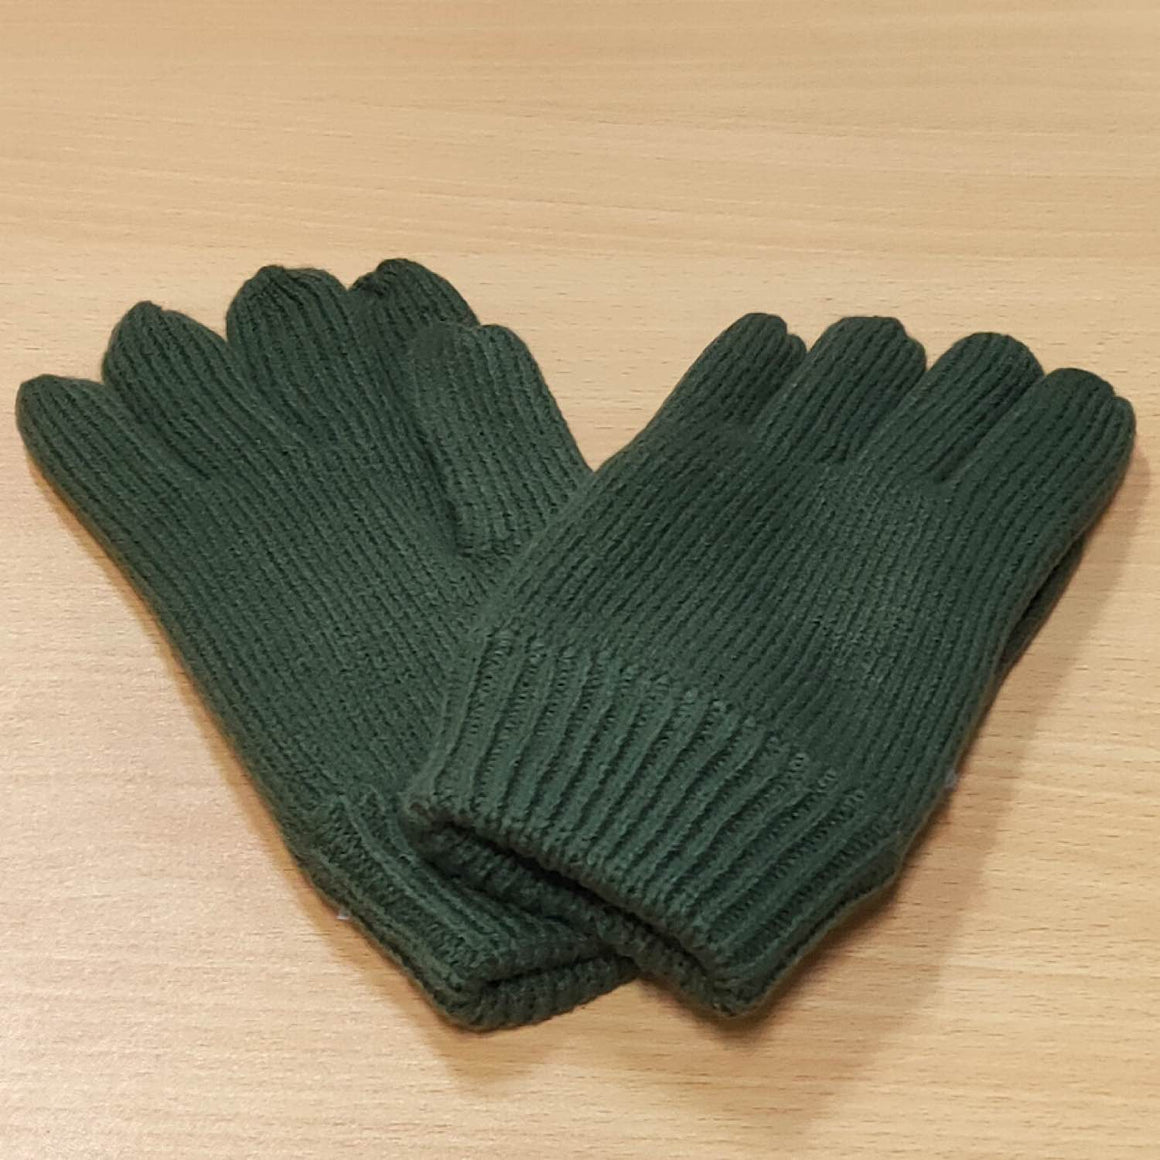 Avenel Acrylic Glove With Thinsulate Lining - Olive